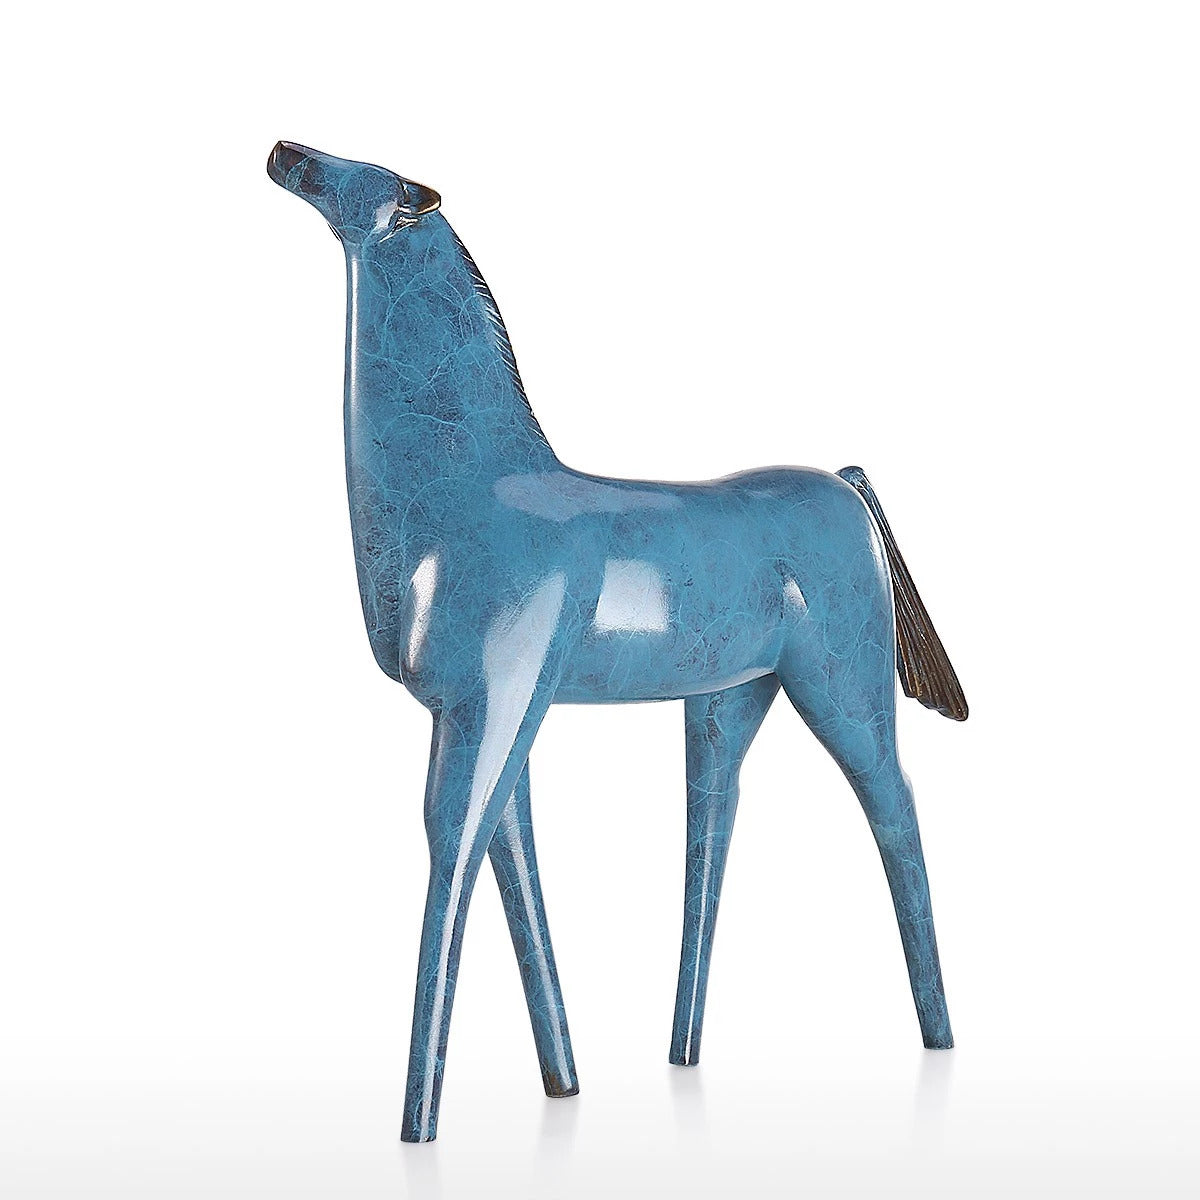 Horse Gifts and Horse Decor with Horse Statue